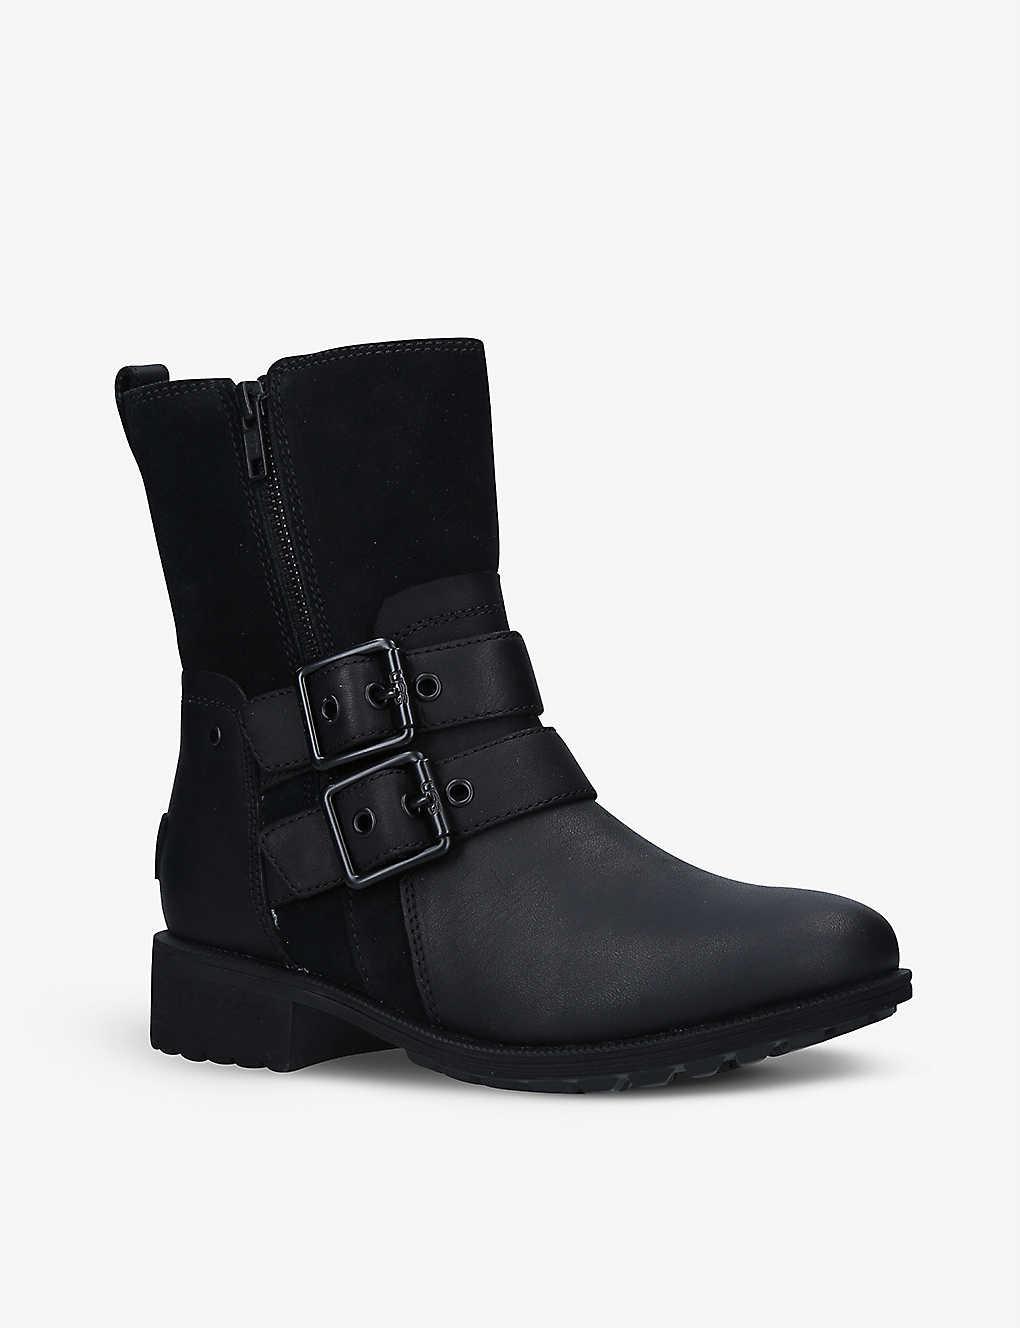 leather and suede ugg boots